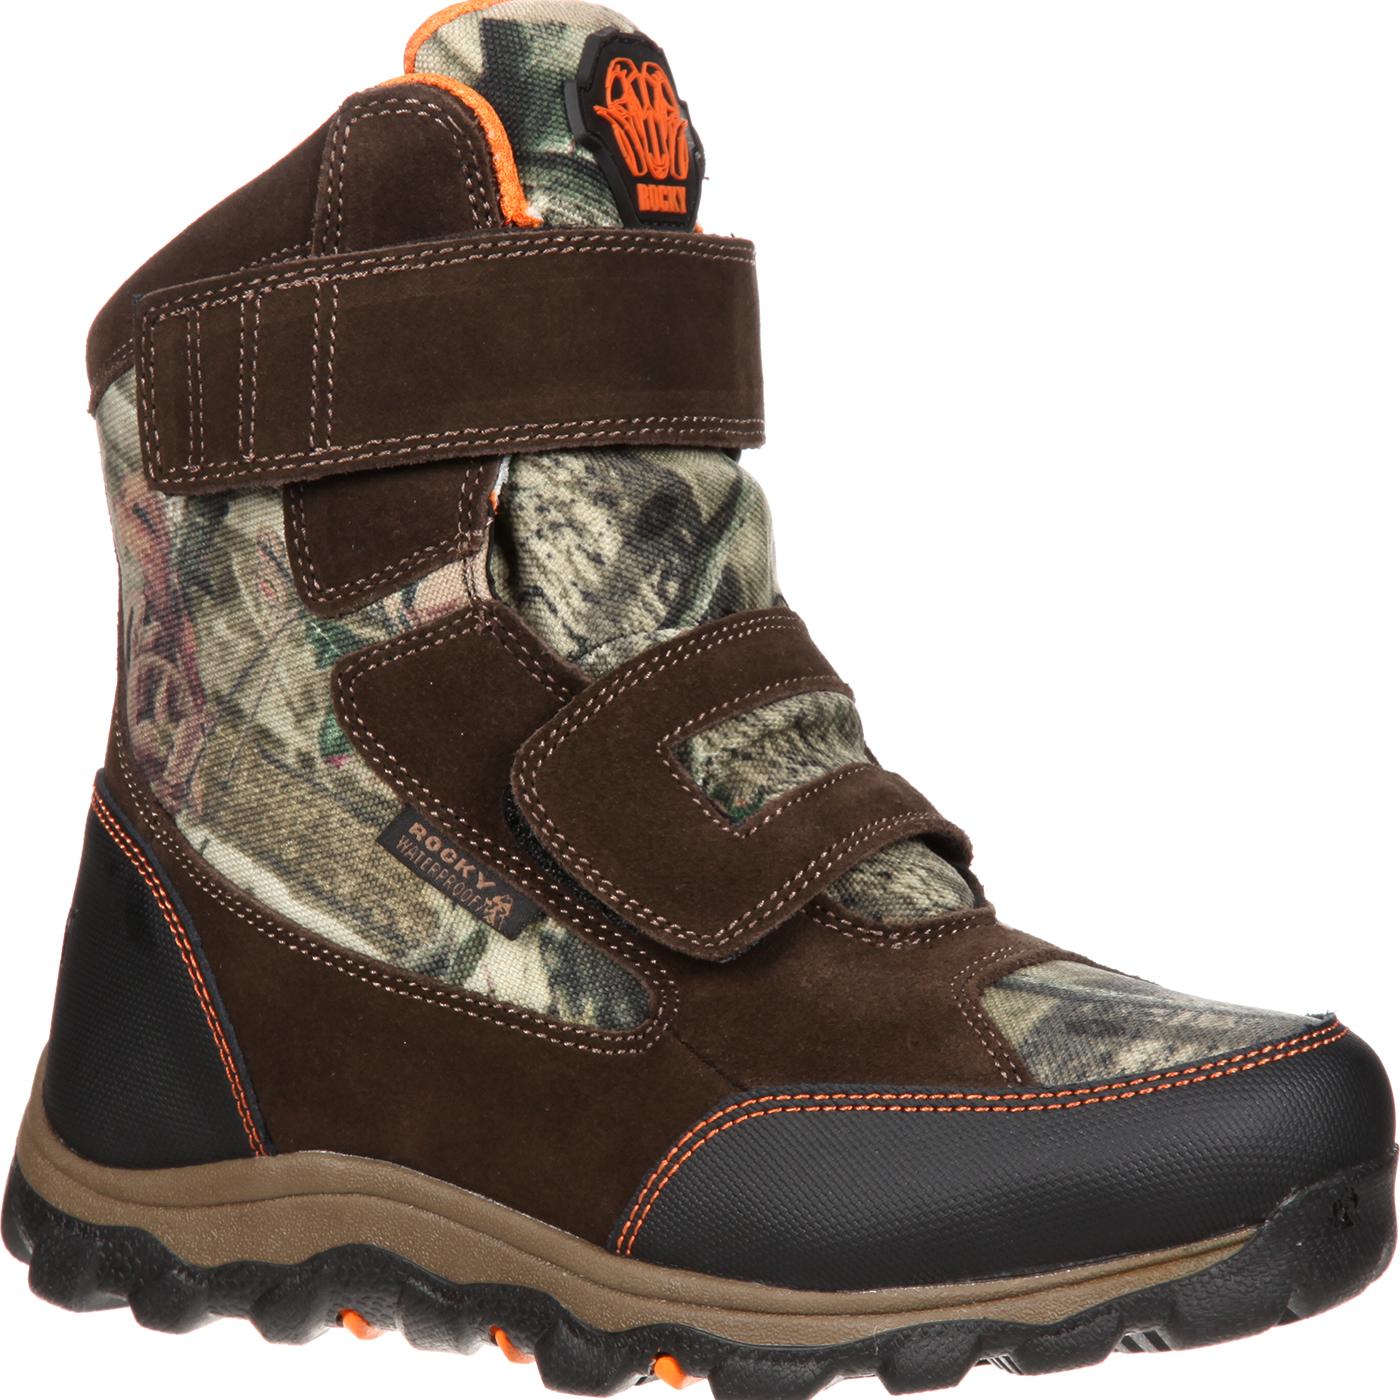 Rocky Kids' R.A.M. Waterproof Insulated Velcro Outdoor Boot